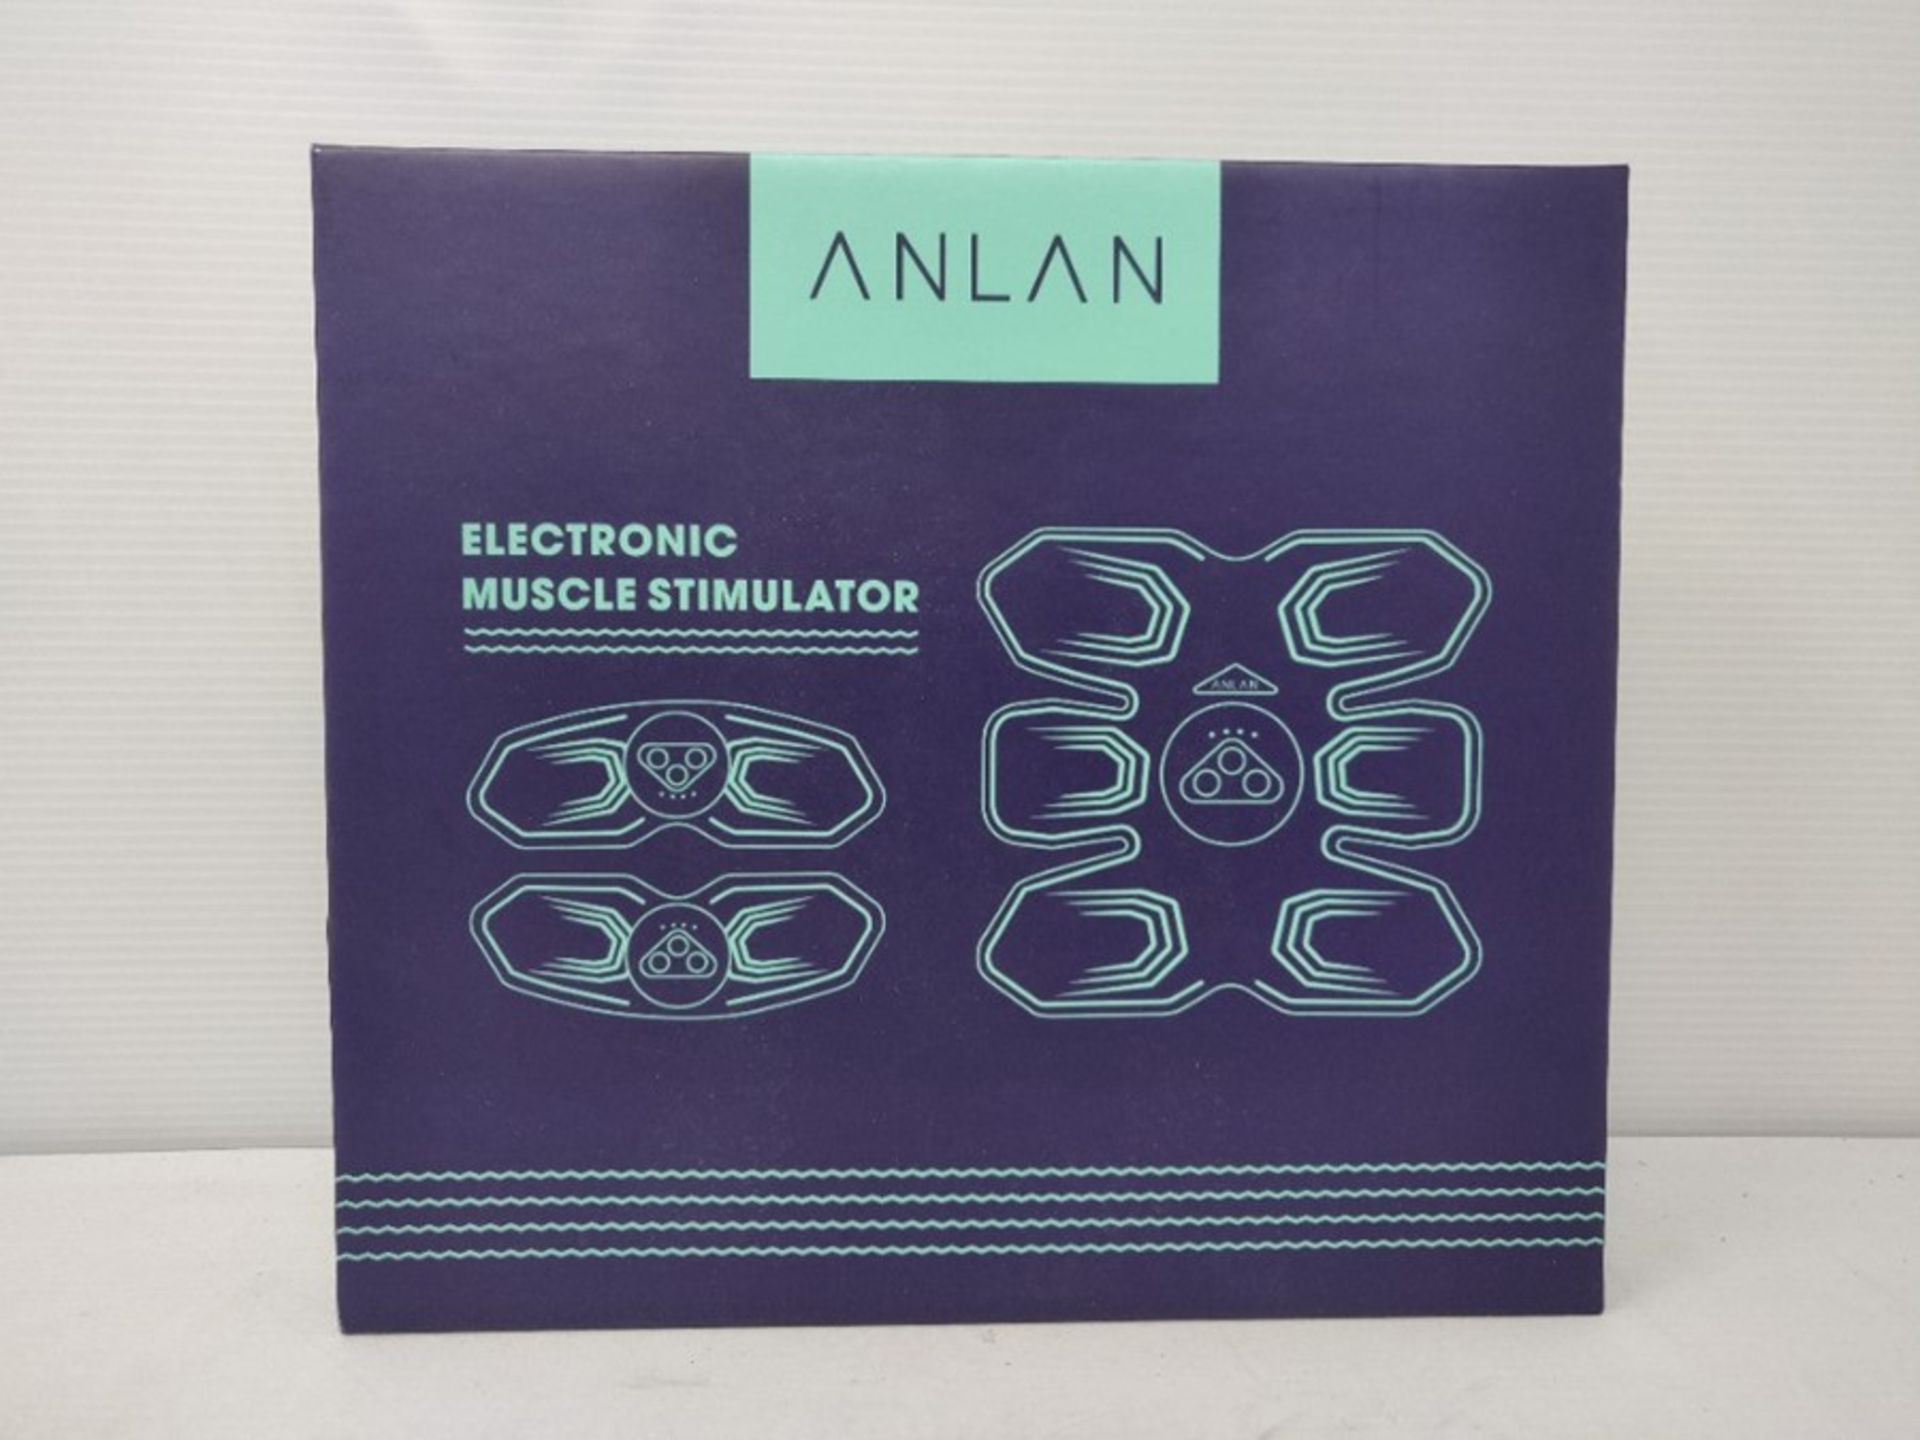 ANLAN EMS Muscle Stimulator, Abs Trainer Abdominal Muscle Toner Electronic Toning Belt - Image 2 of 3